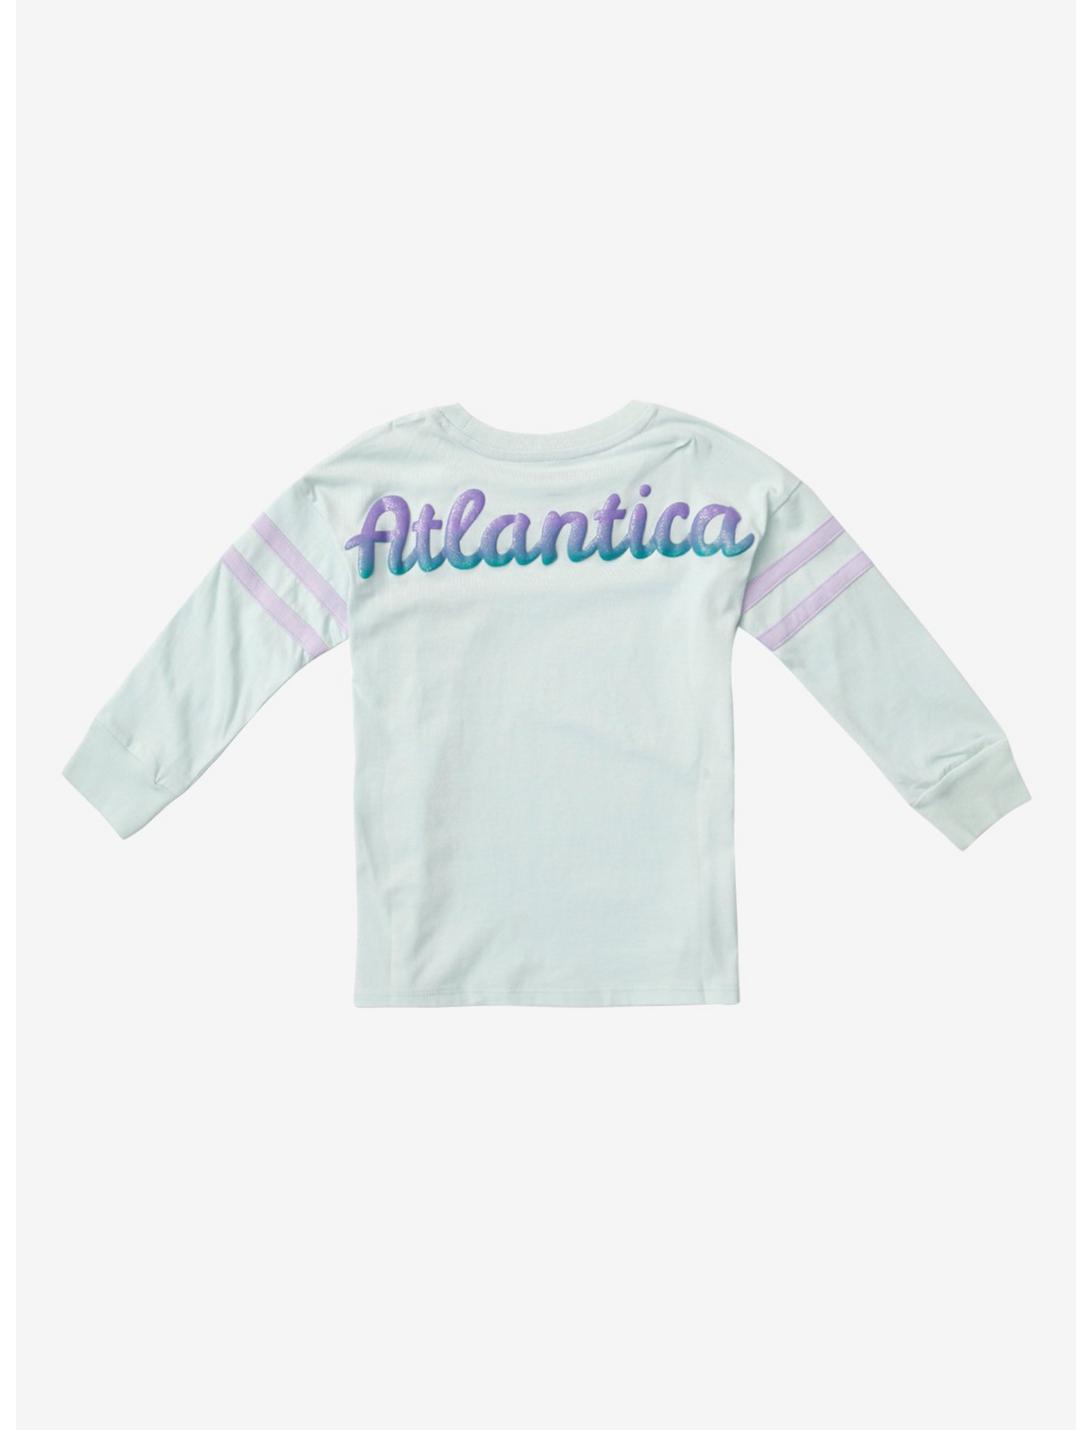 Disney The Little Mermaid Atlantica Toddler Hype Jersey - BoxLunch Exclusive, PURPLE, hi-res